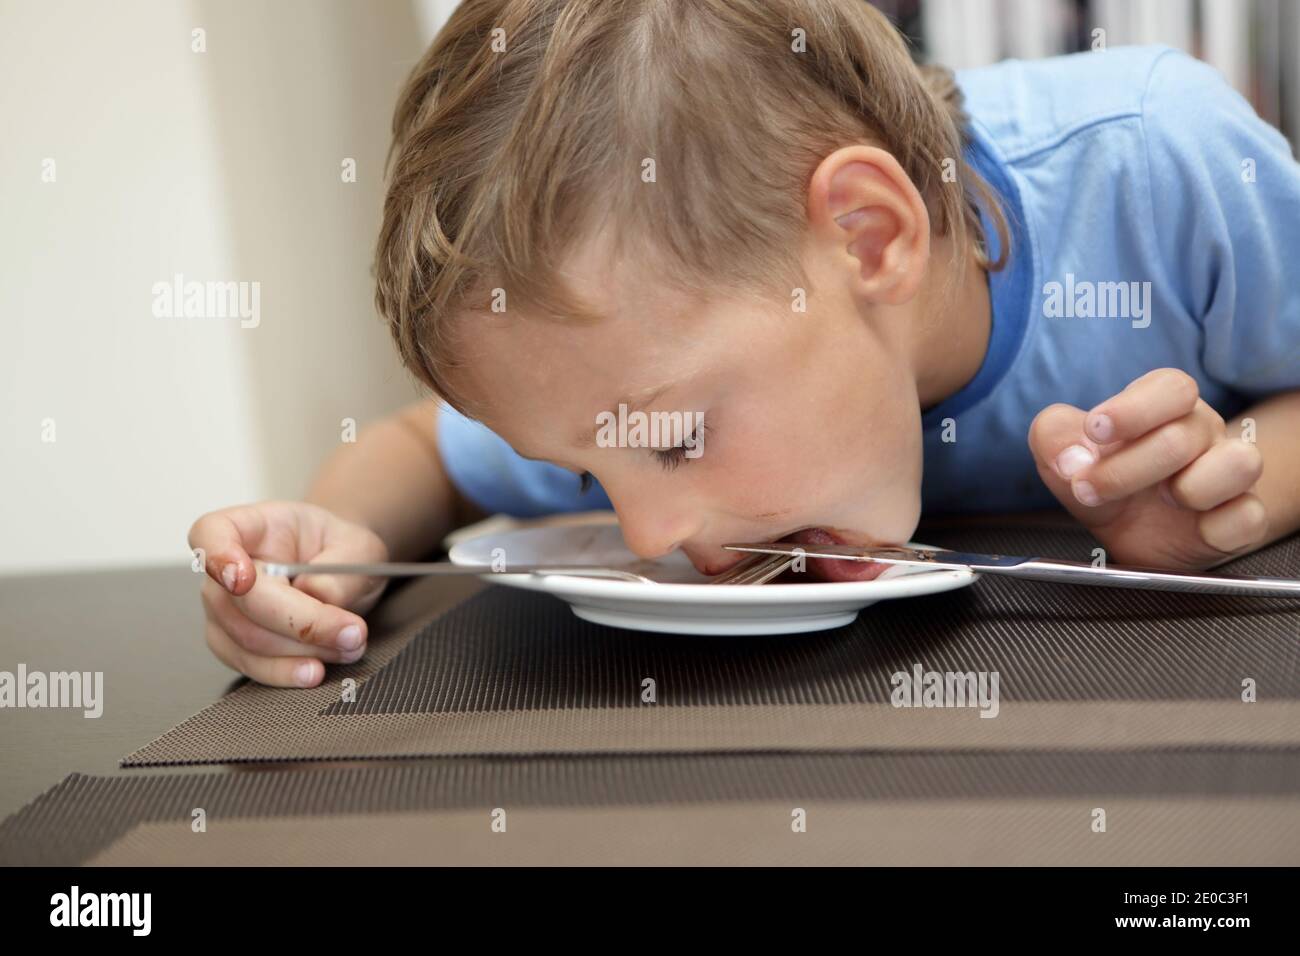 Child licking remnants of food from plate in cafe Stock Photo